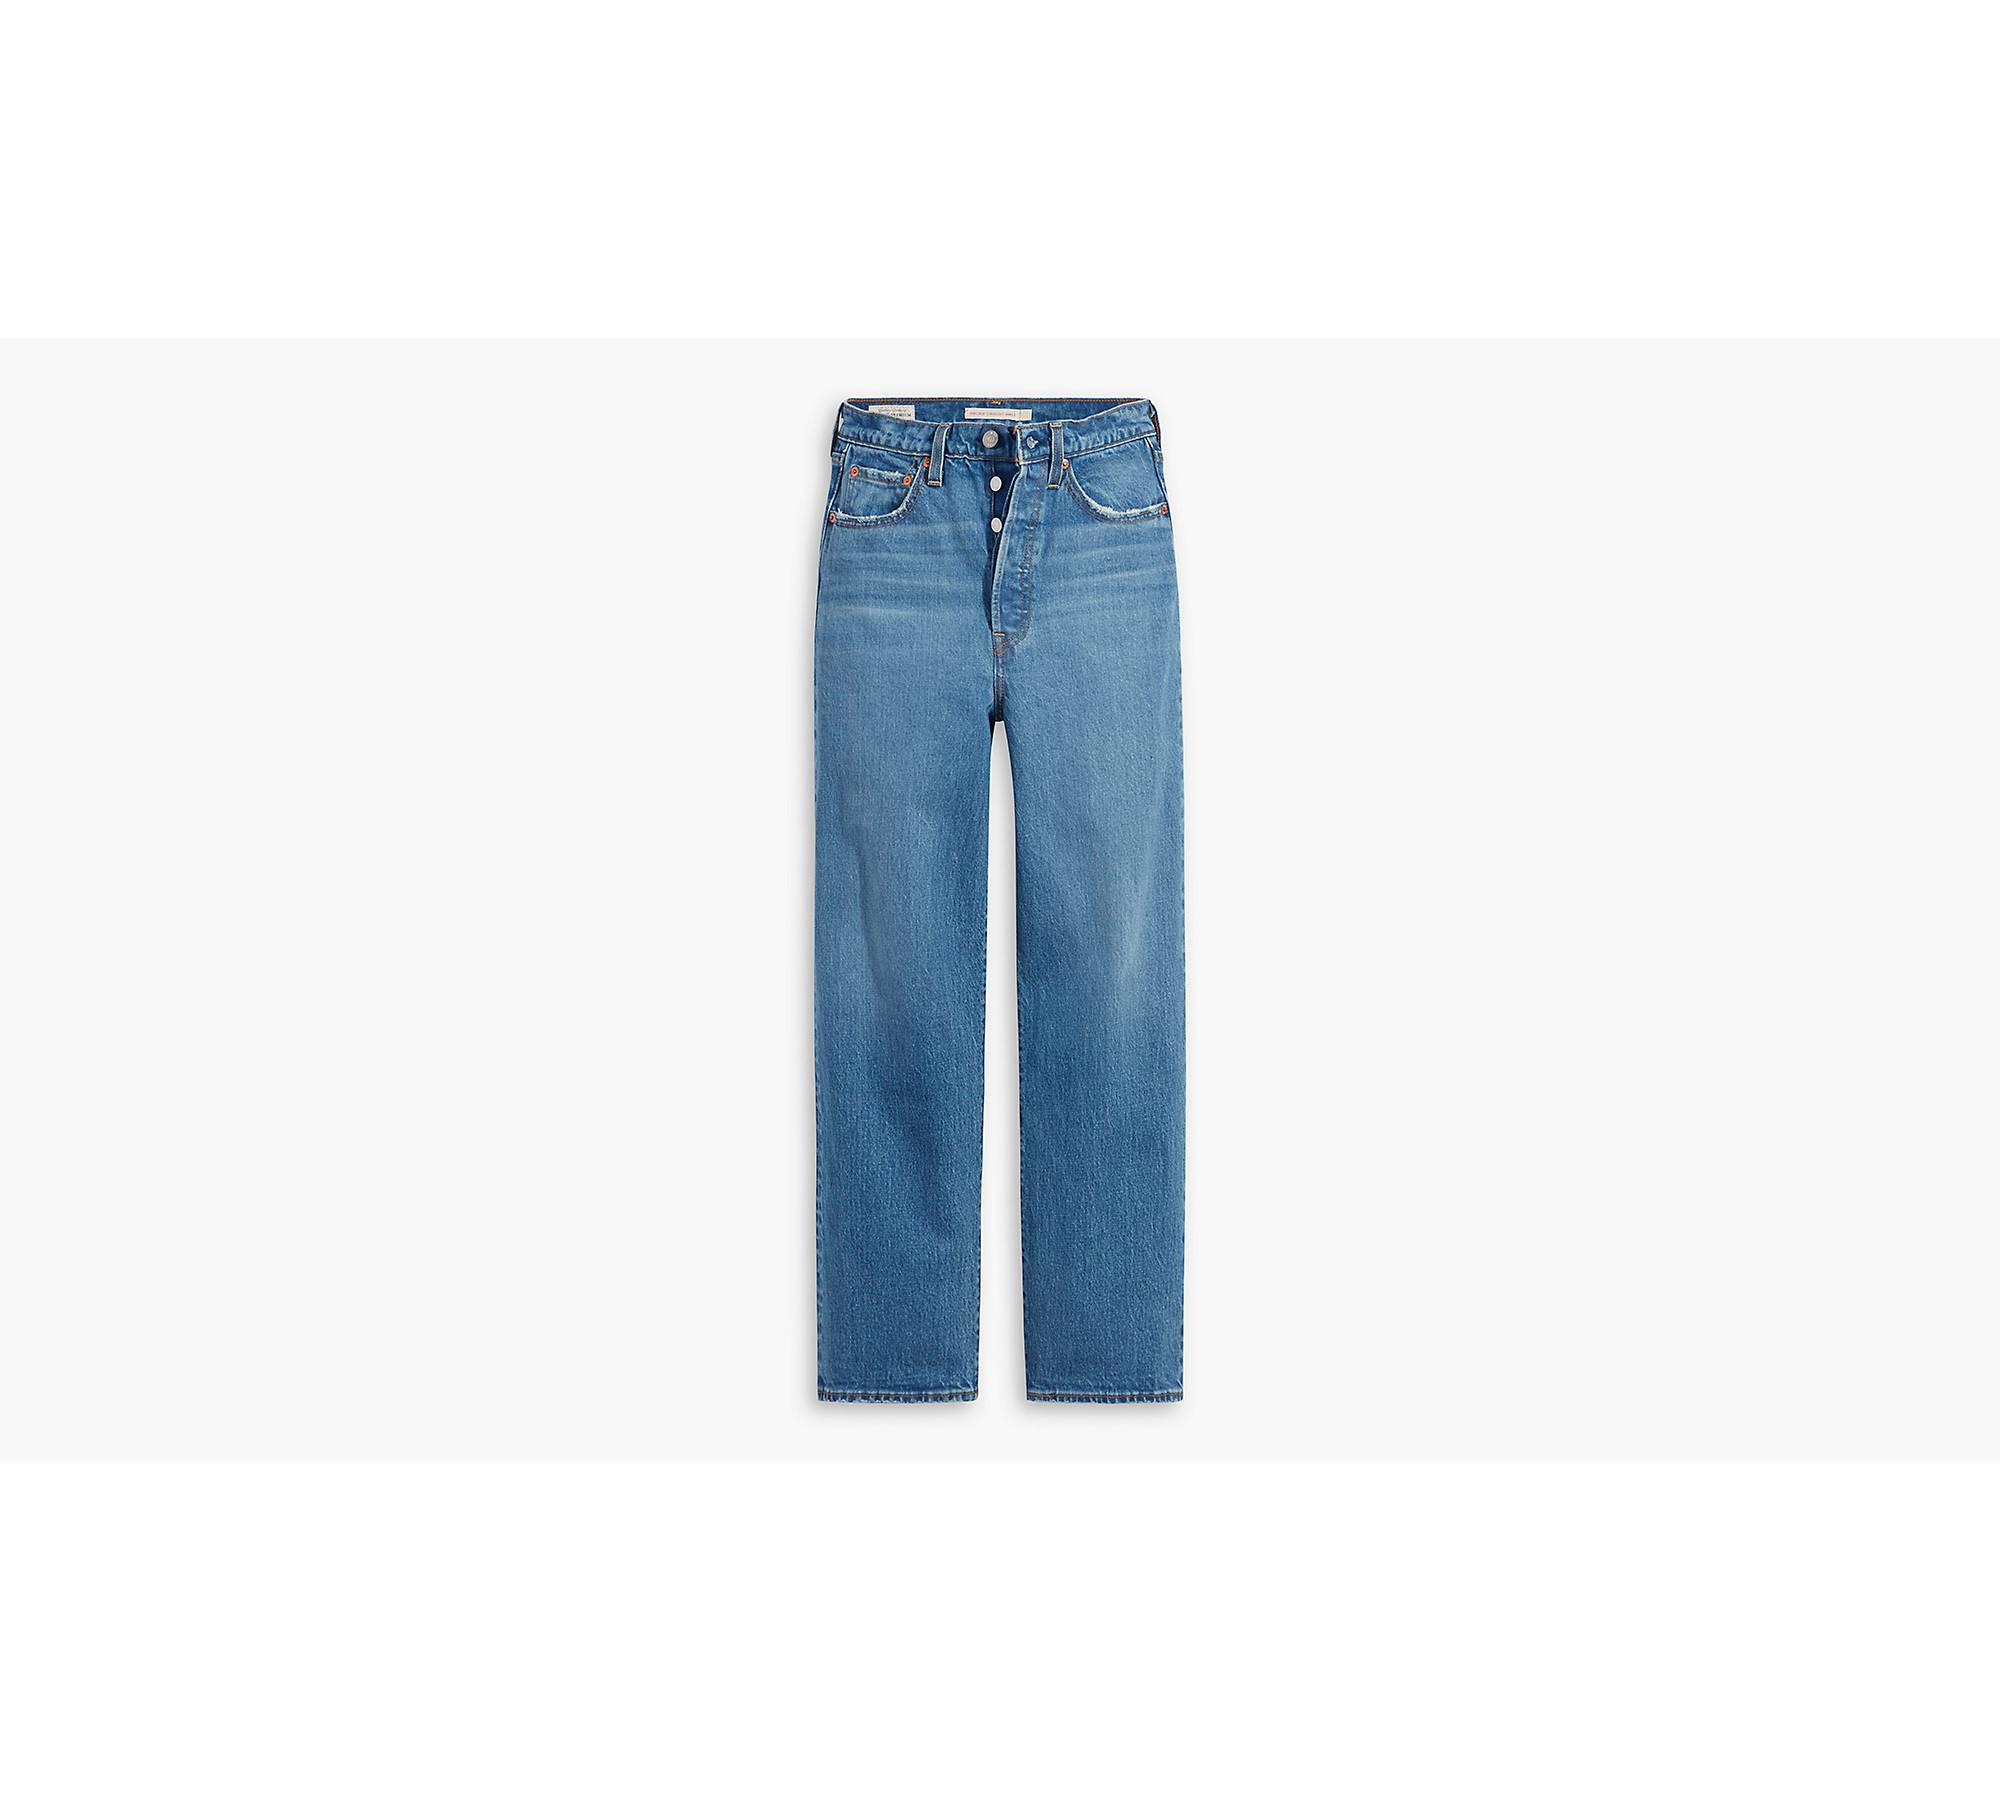 LIOAD Flared Women Blue Jeans - Buy LIOAD Flared Women Blue Jeans Online at  Best Prices in India